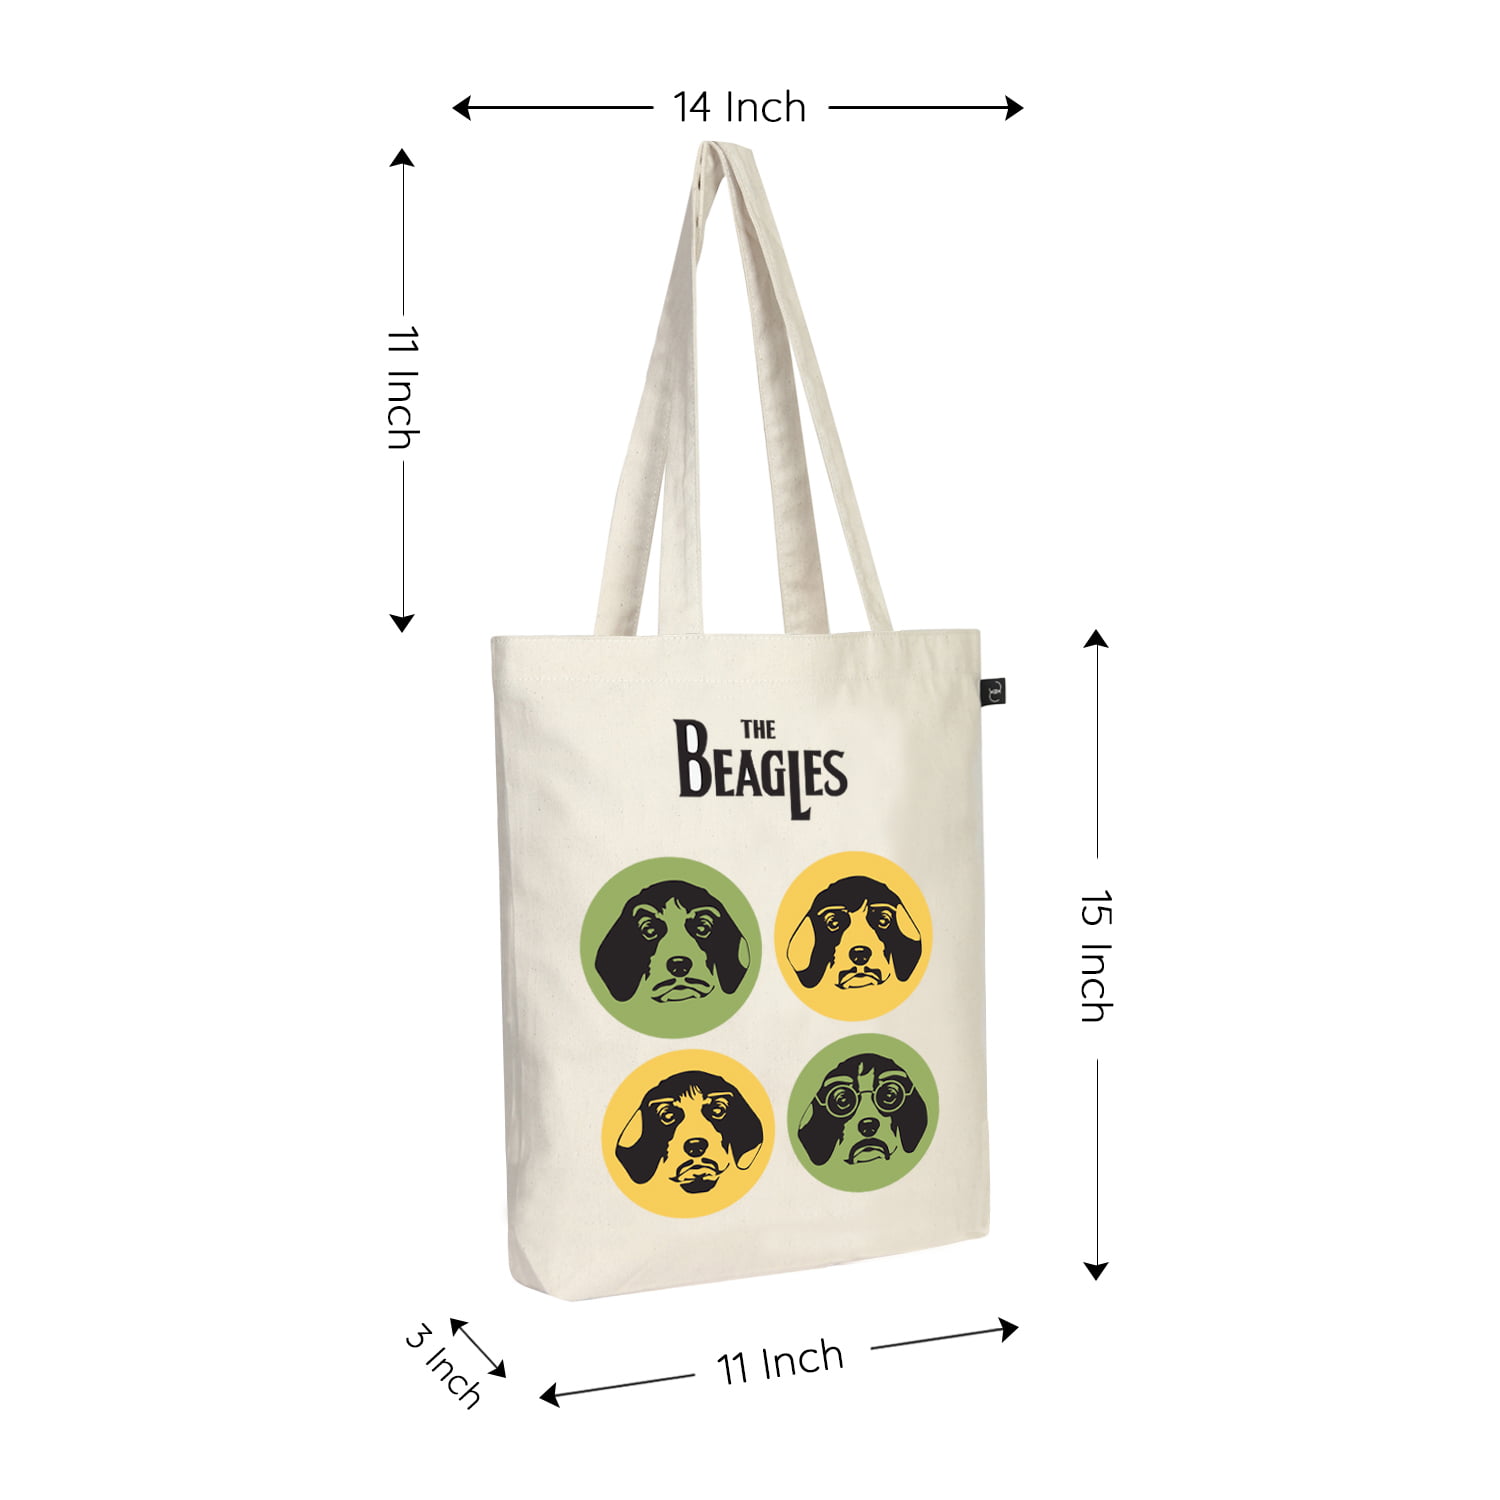 Ecoright's Houston We Have a Problem Zipper Tote - Space-Themed